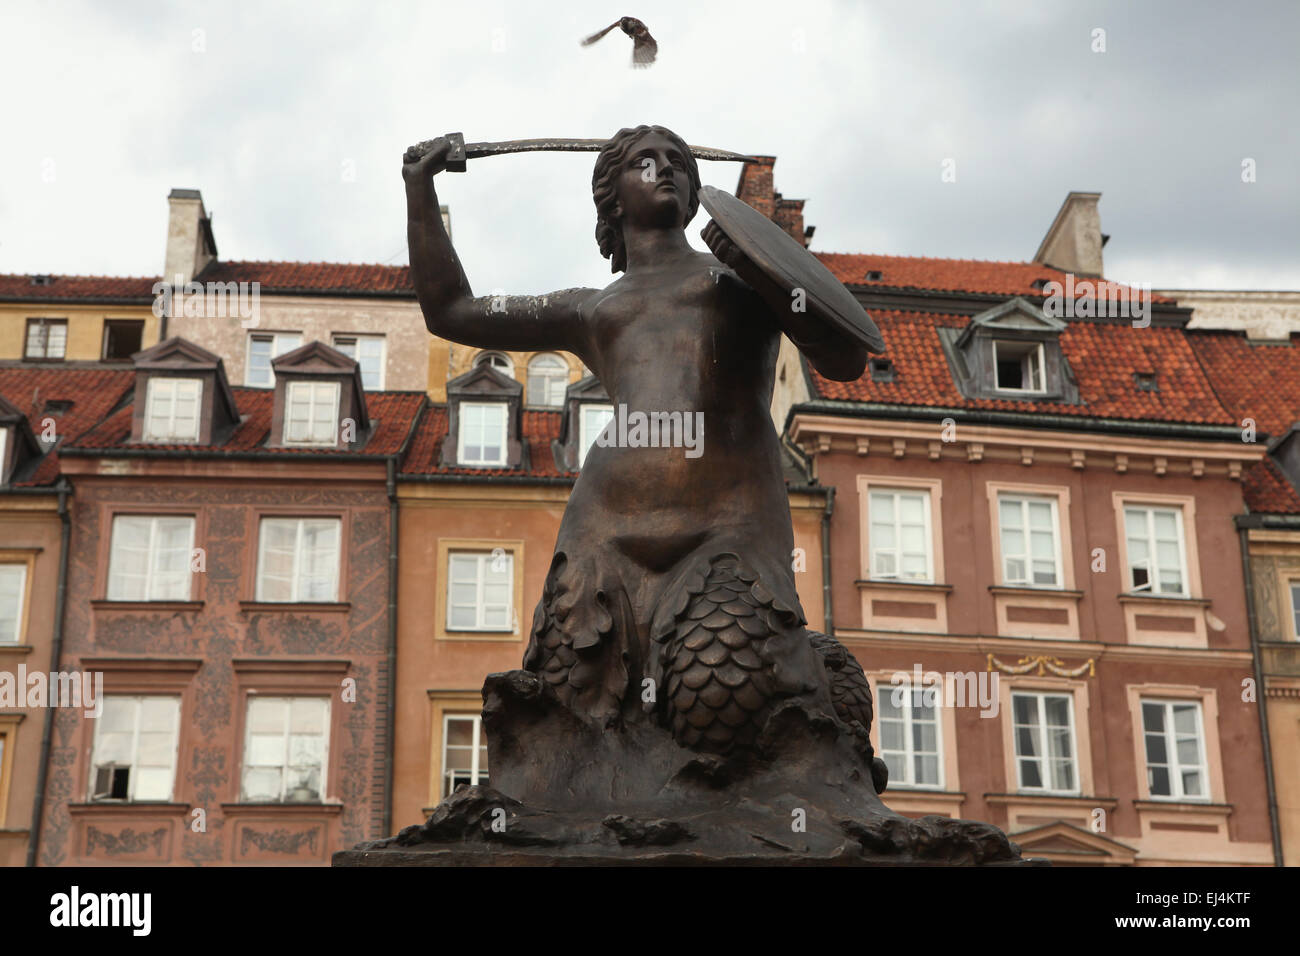 Statue of the Mermaid of Warsaw by sculptor Konstanty Hegel (1855) at the Old Town Square in Warsaw, Poland. Stock Photo